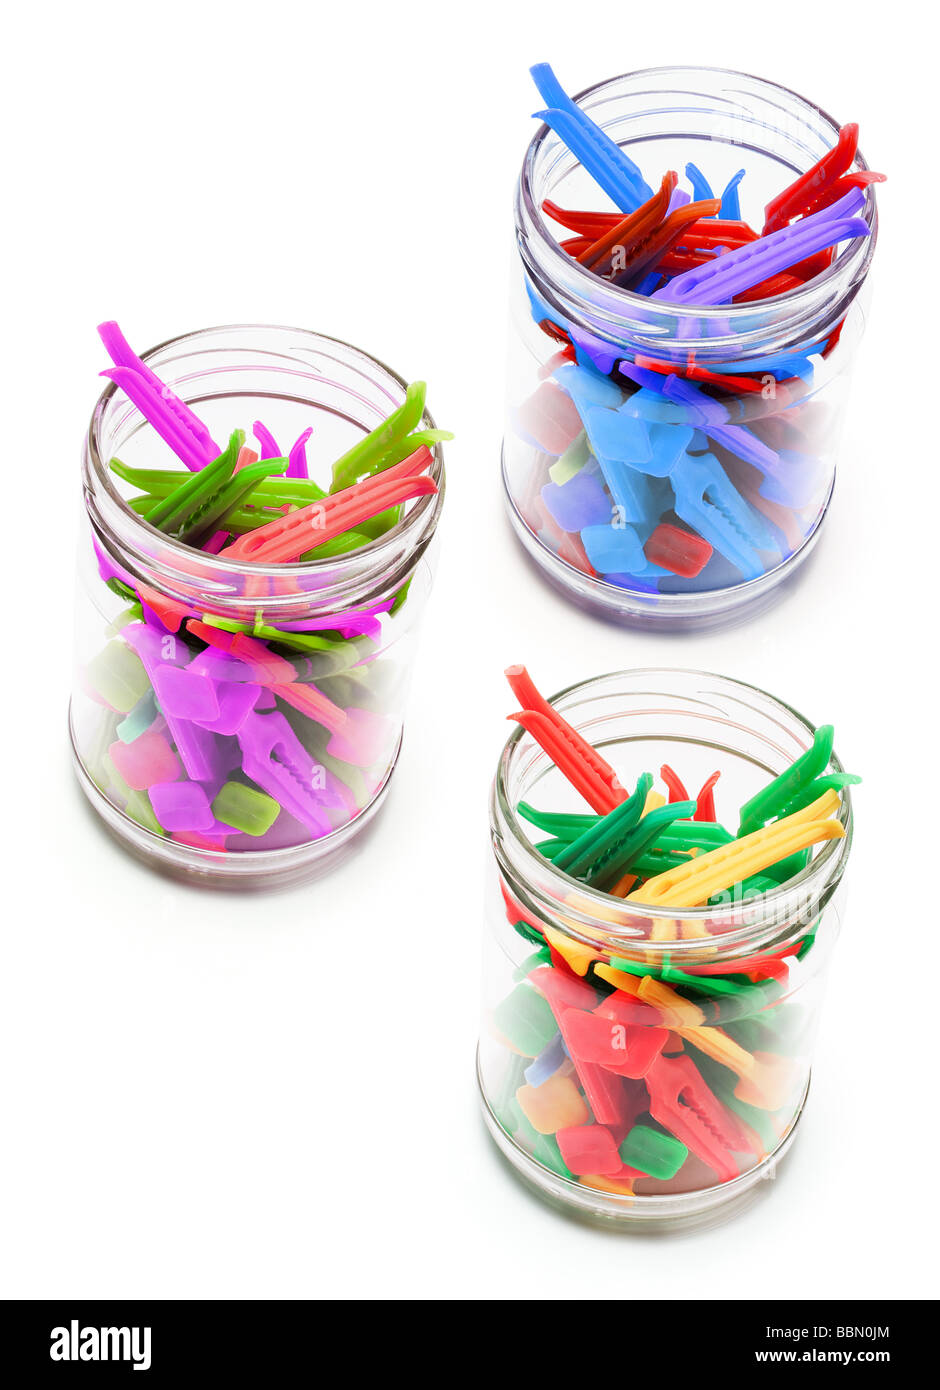 Clothes Pegs in Glass Jars Stock Photo